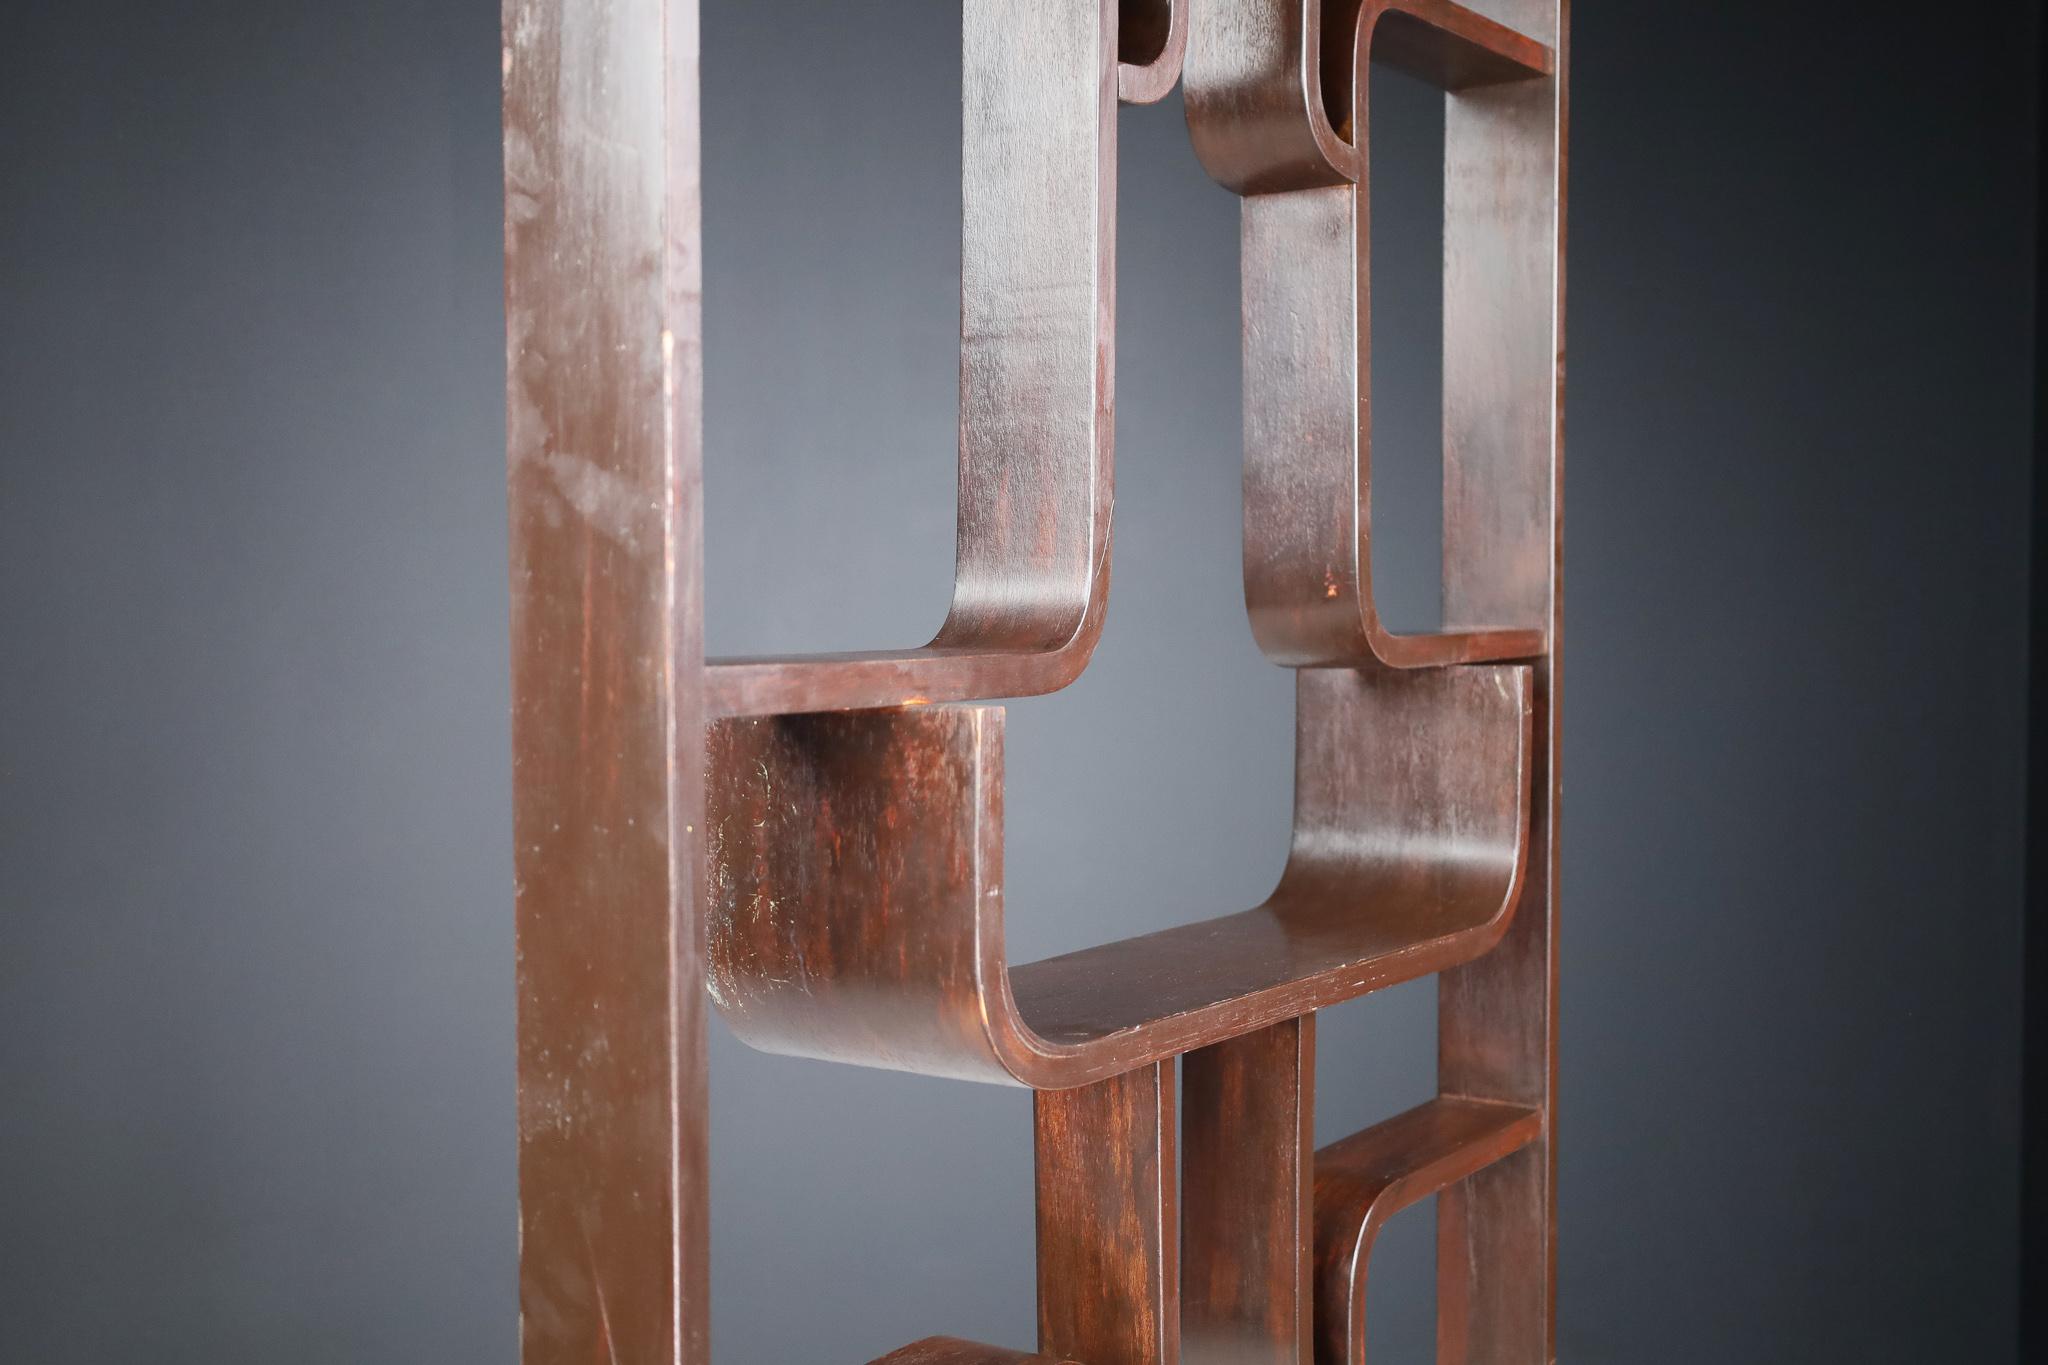 Midcentury Room Divider in Dark Stained Bent-Wood by Ludvik Volak, Praque 1960s For Sale 1